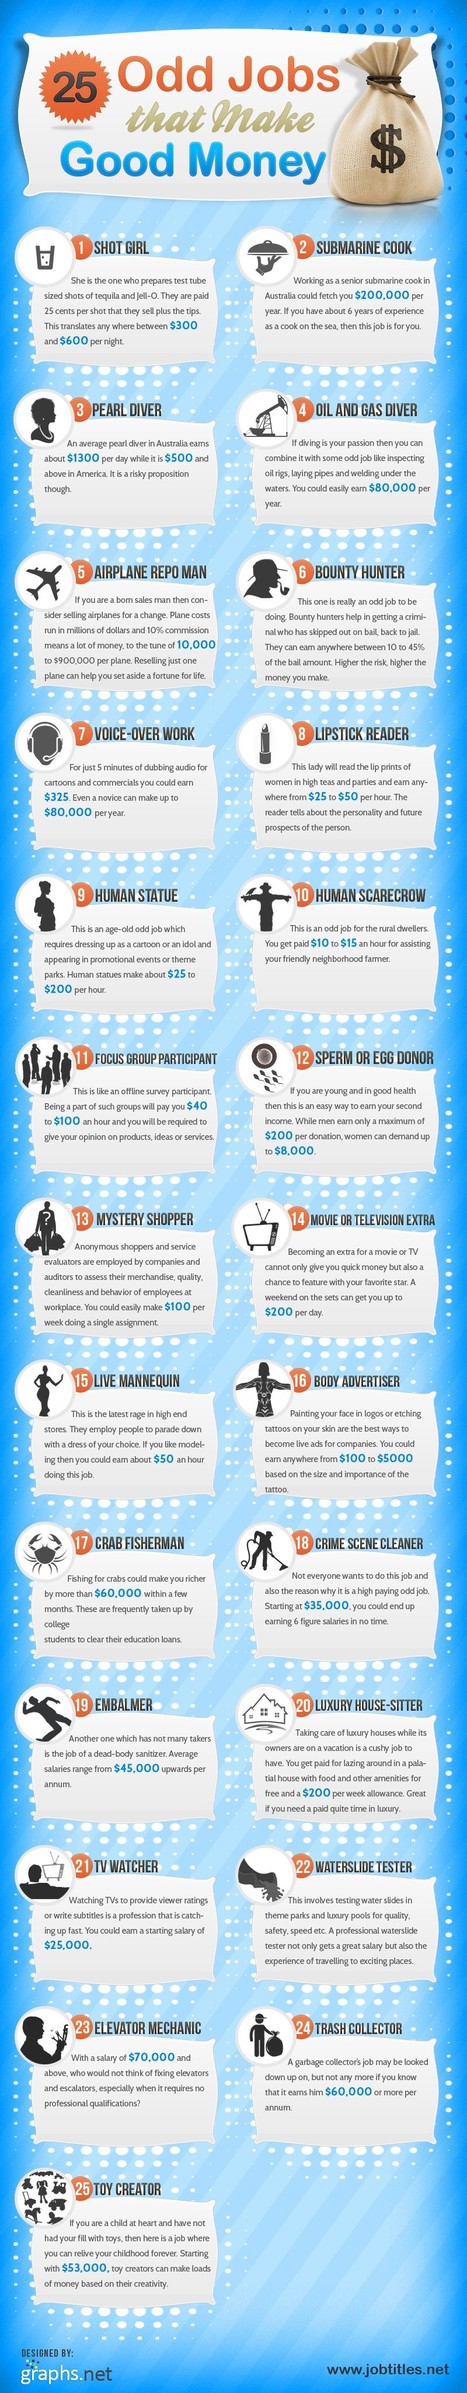 Top 25 Best Jobs that can bring in Good and Instant Money | All Infographics | Latest Social Media News | Scoop.it